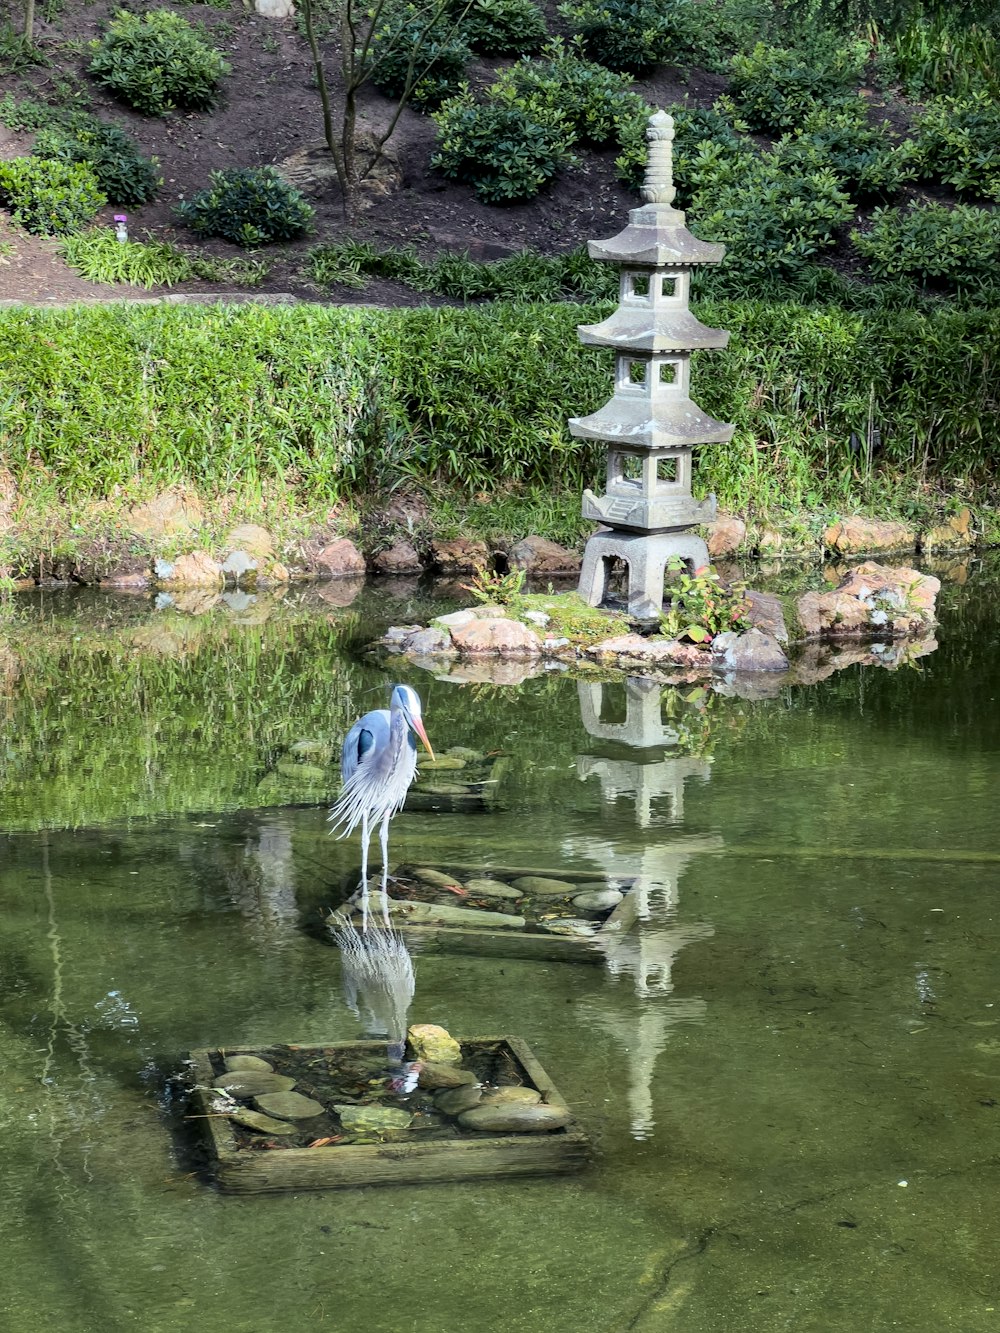 a bird is standing on a piece of wood in the water